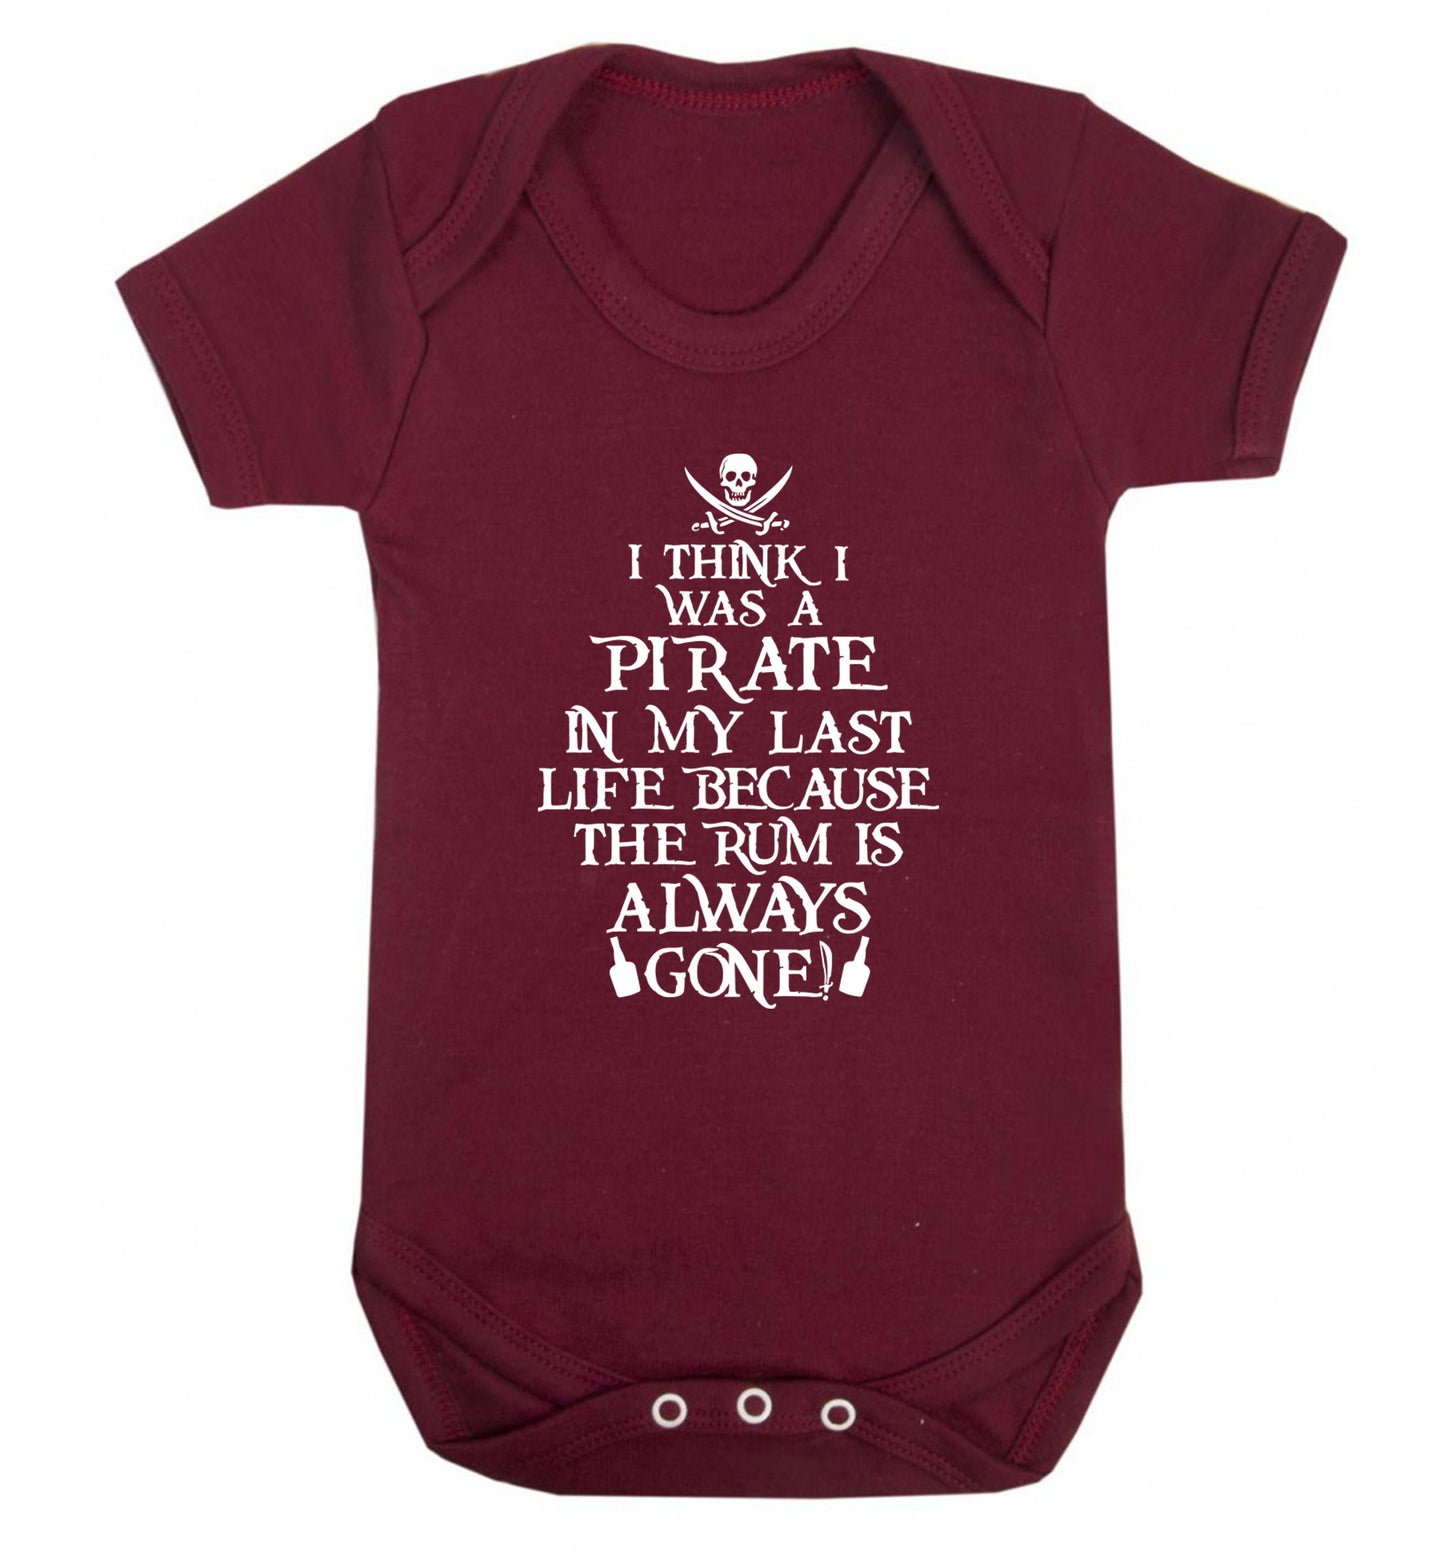 I think I was a pirate in my past life because the rum is always gone! Baby Vest maroon 18-24 months